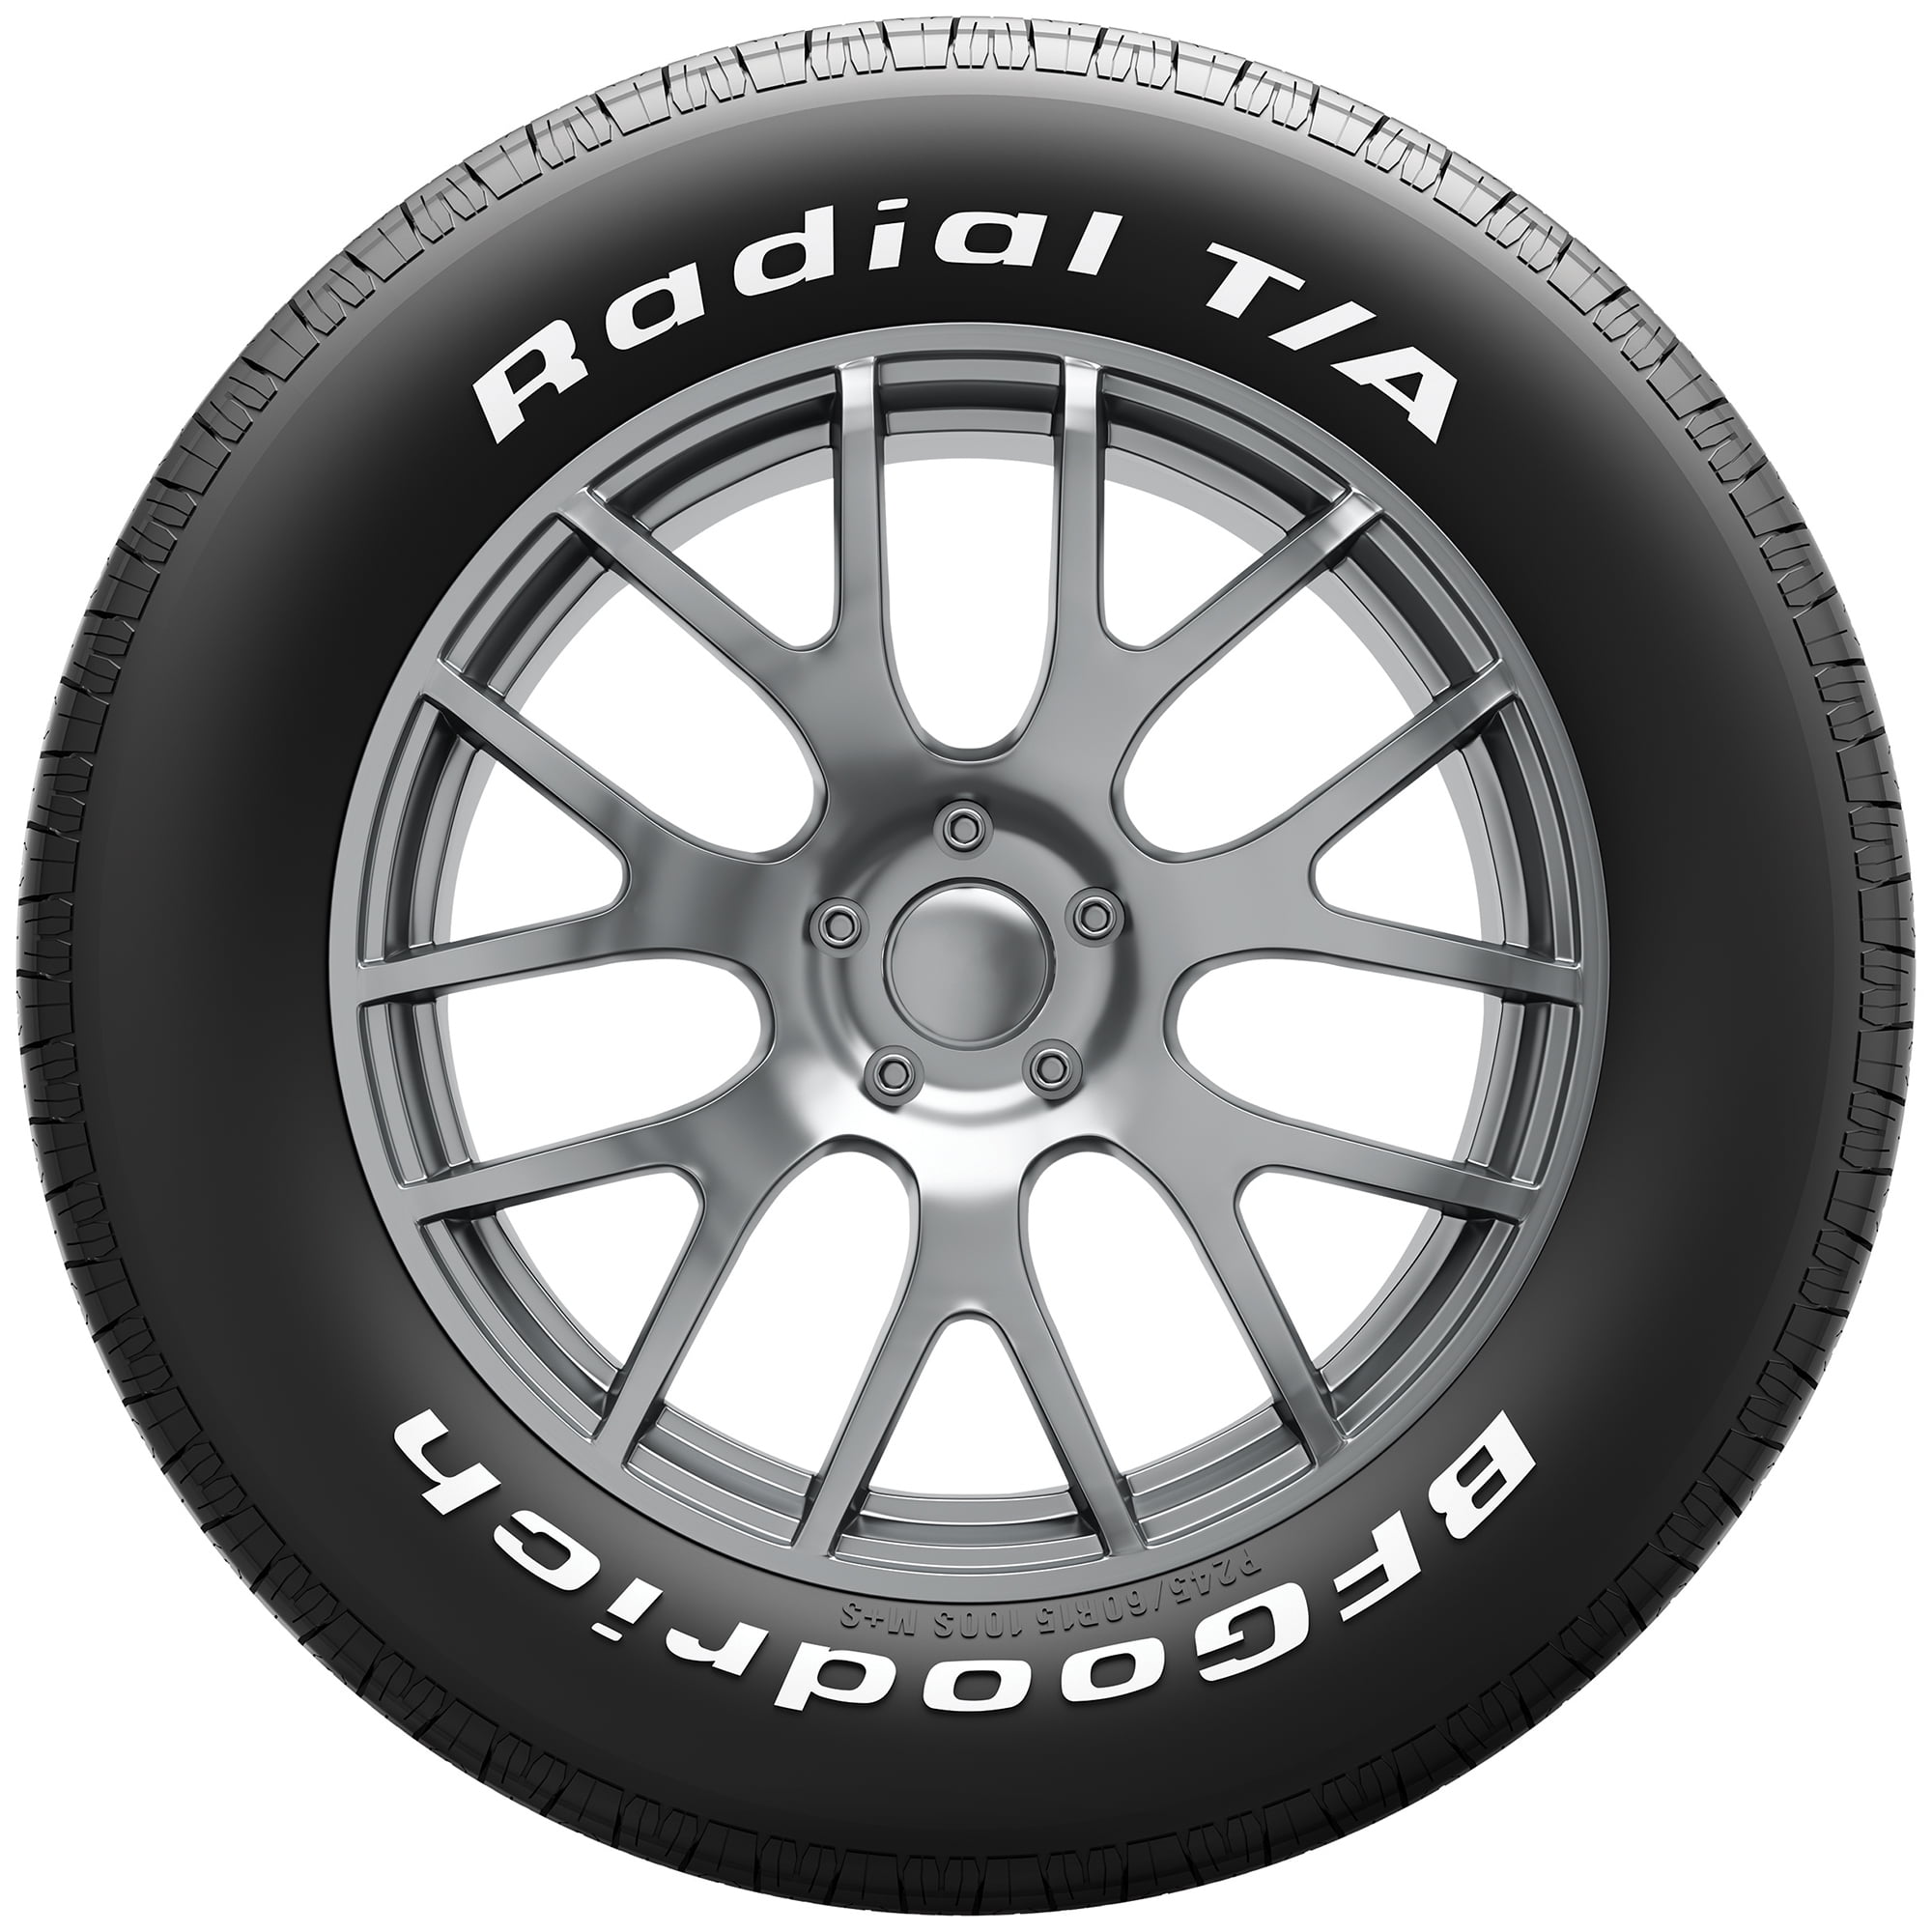 P235//60R15 BF Goodrich Radial T//A 98S White Letter Tire